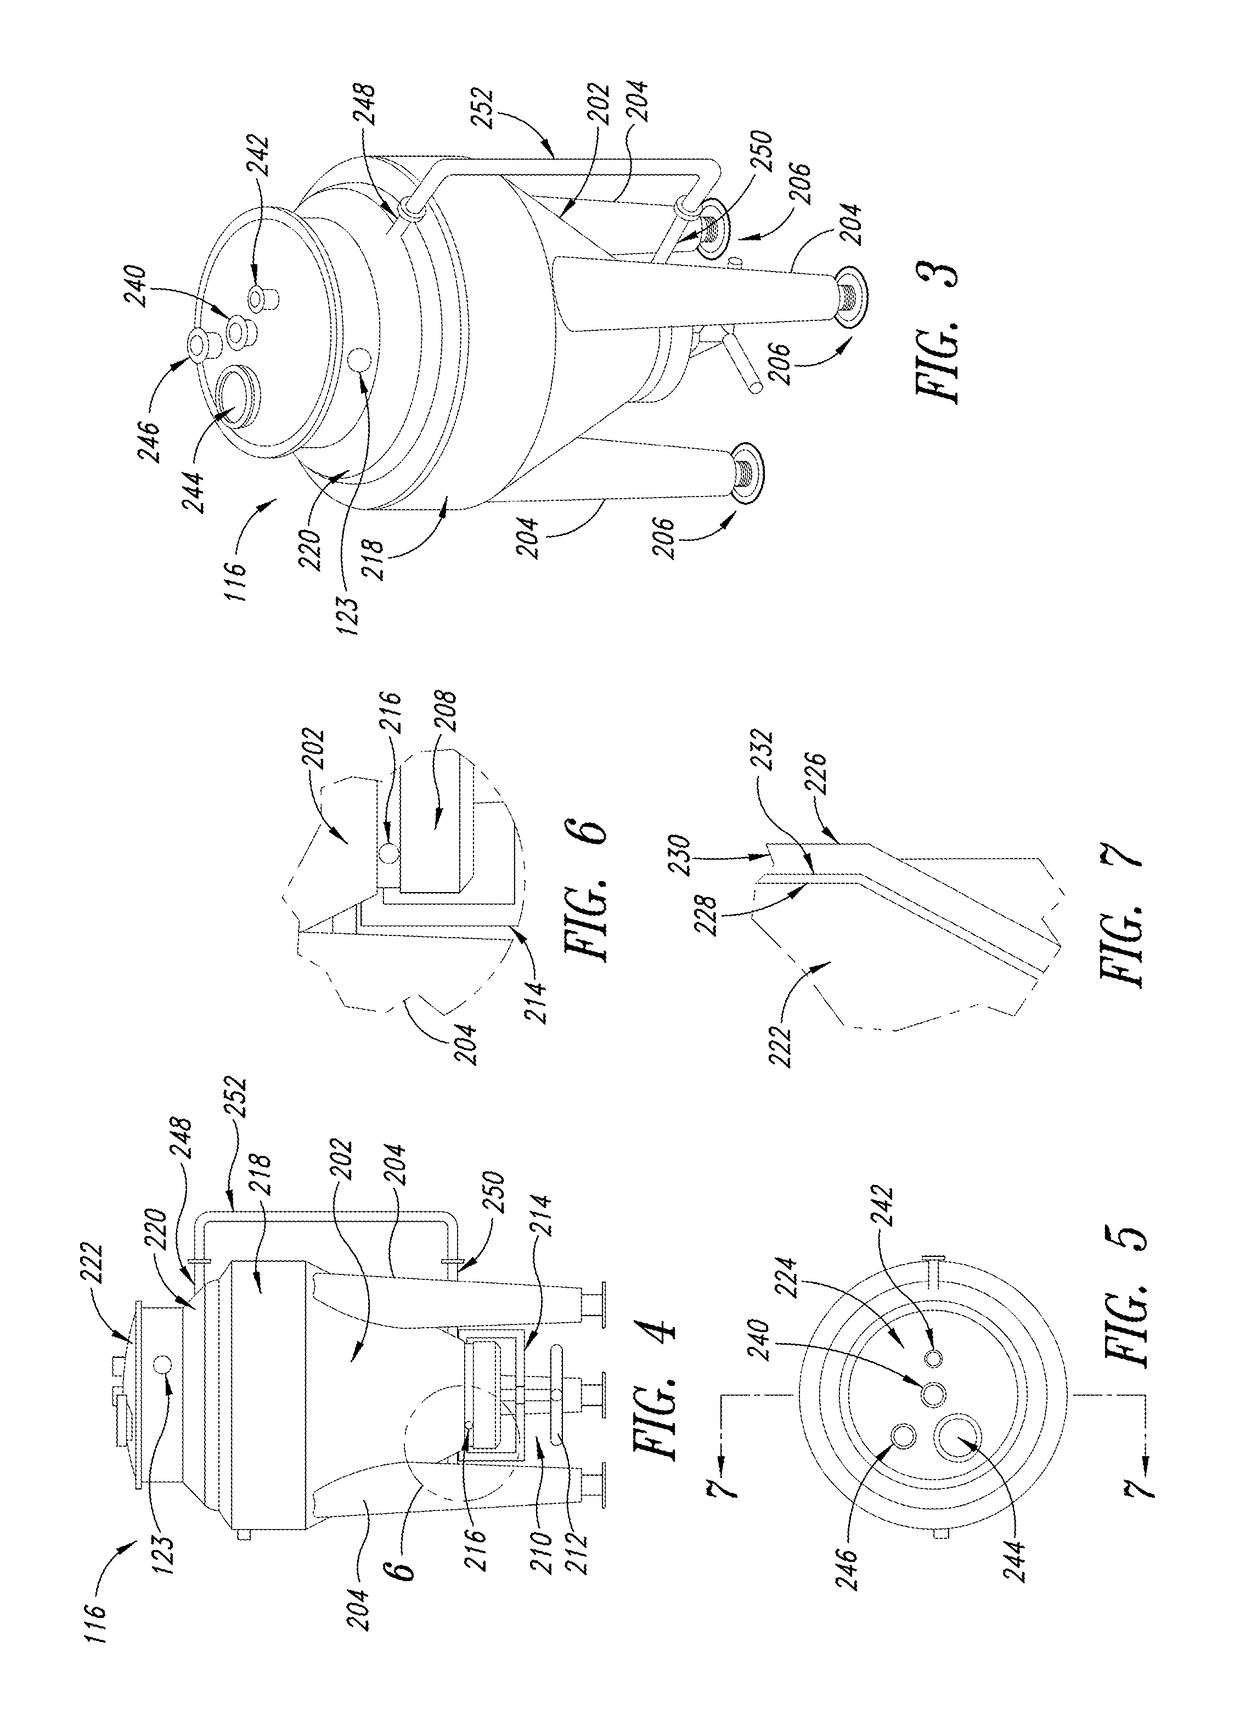 Enhanced essential oil extraction, recovery, and purge system and method